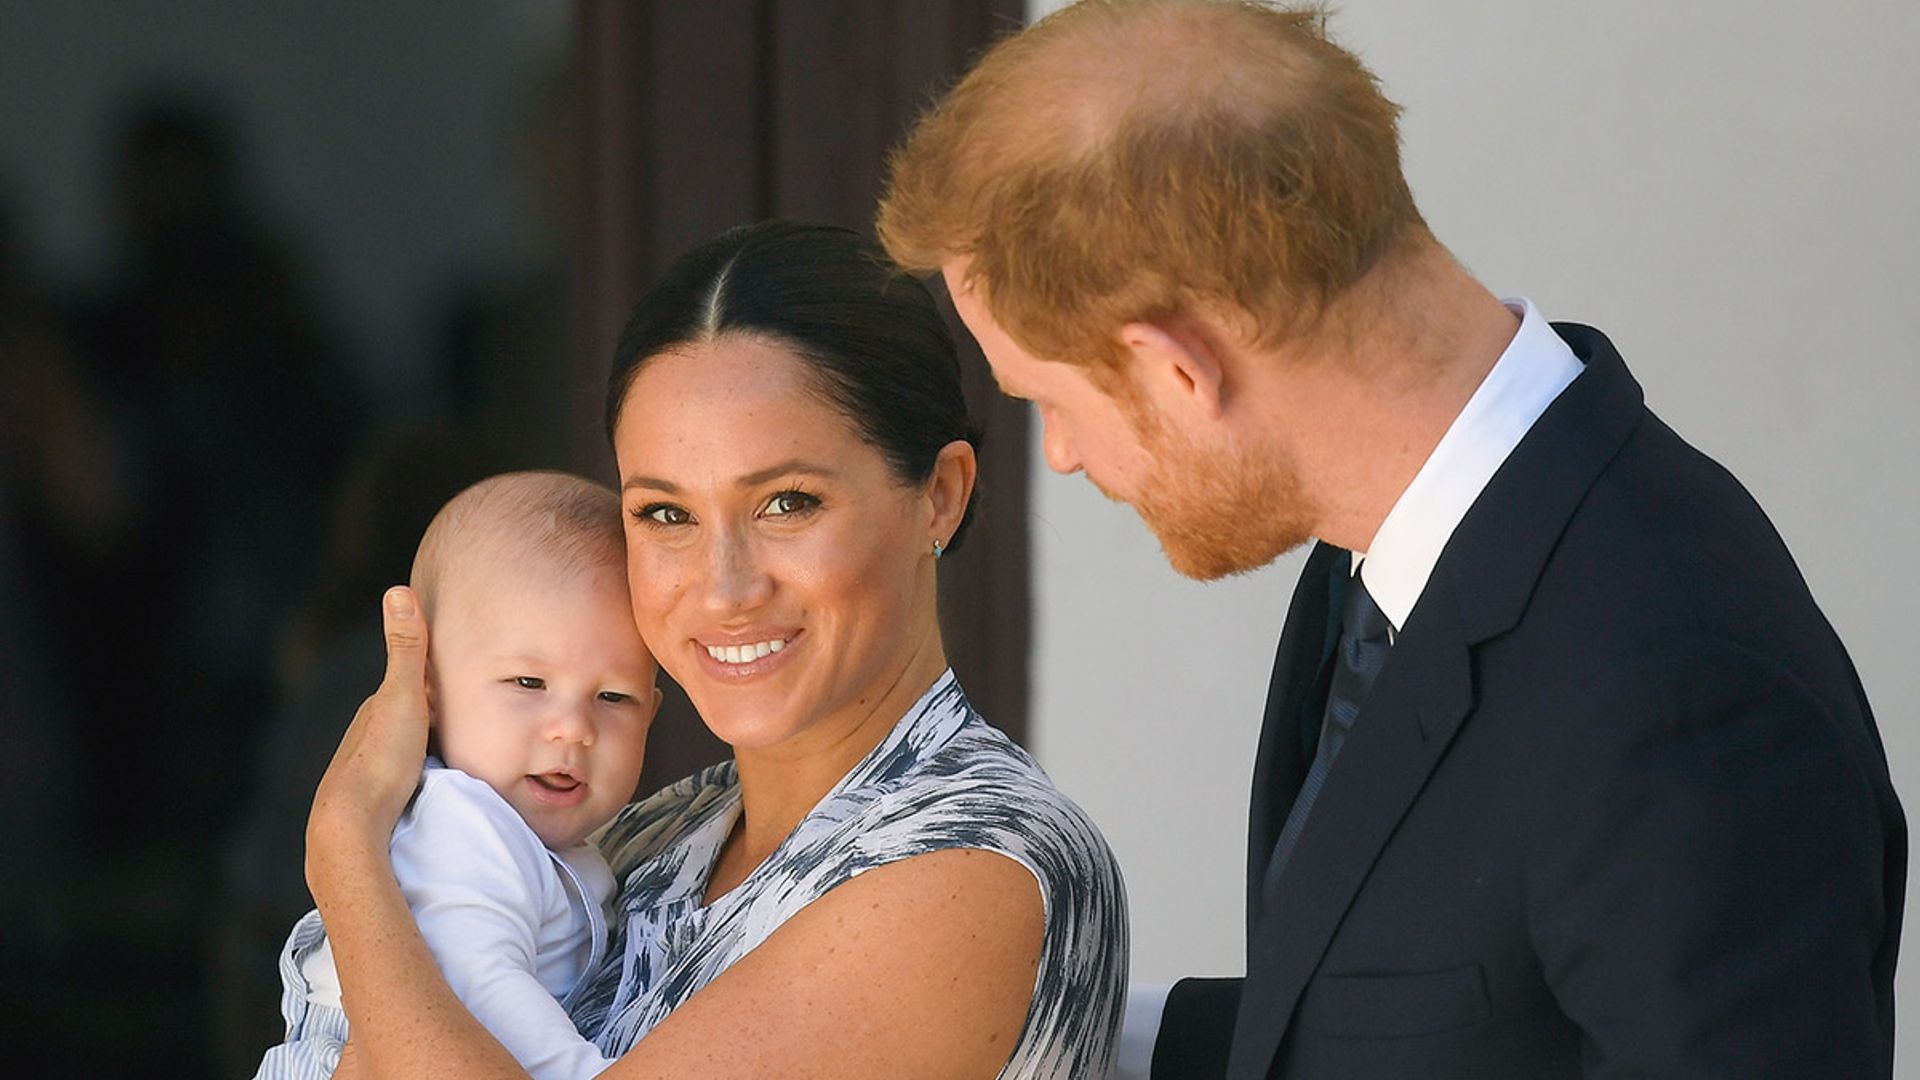 Prince Harry reveals his concerns for son Archie in new personal message